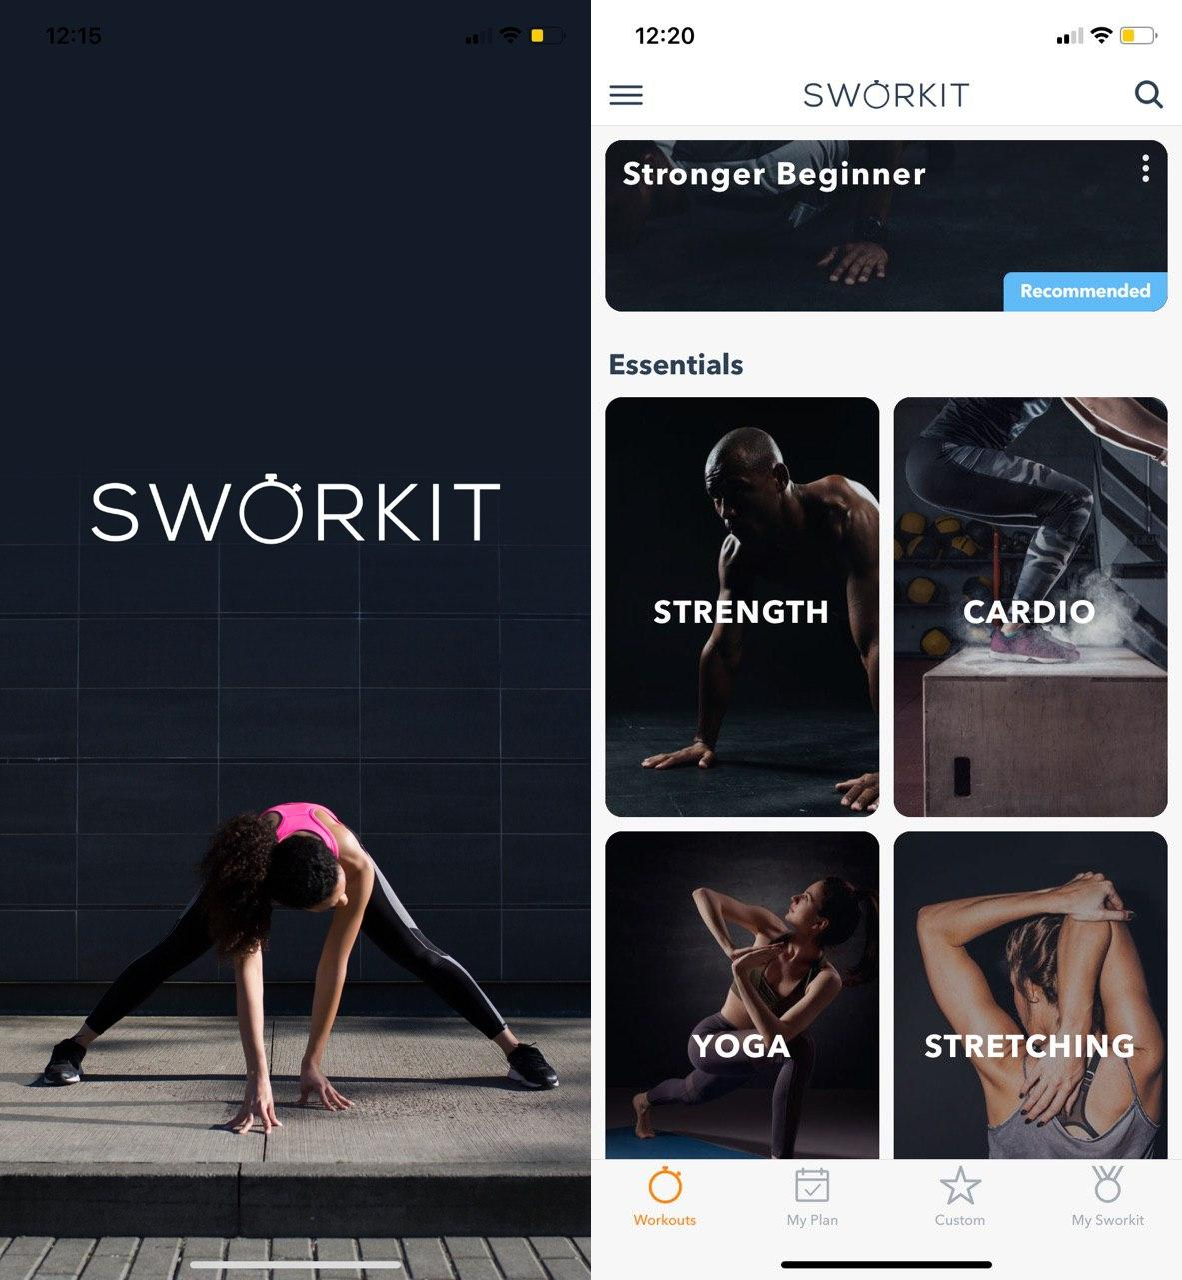 Sworkit - Personal Trainer, Studio Apps or Workout Business